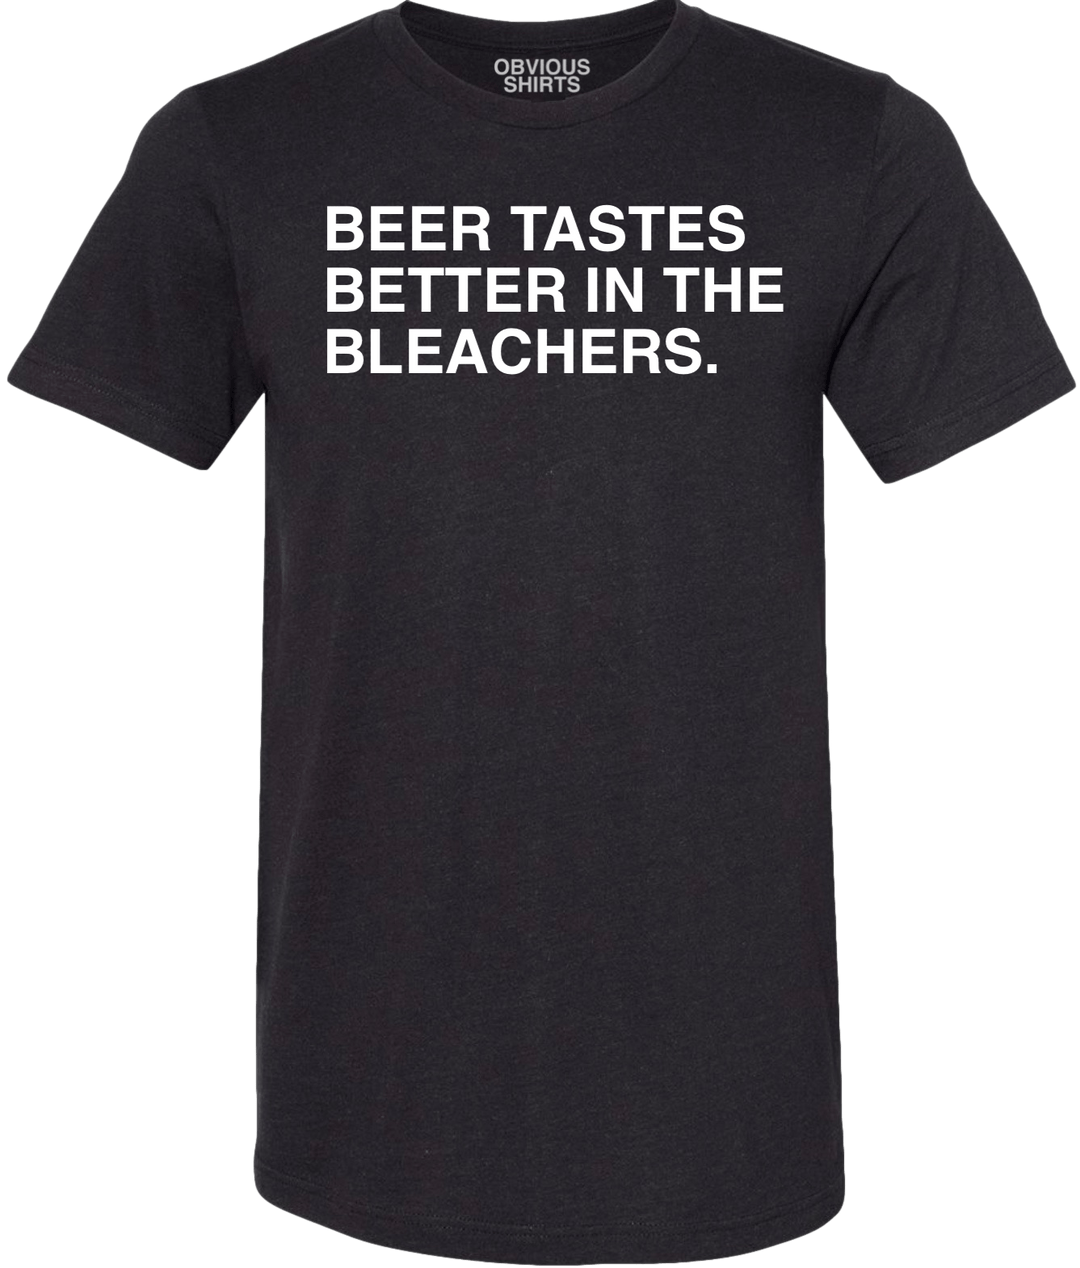 BEER TASTES BETTER IN THE BLEACHERS. (BLACK) - OBVIOUS SHIRTS